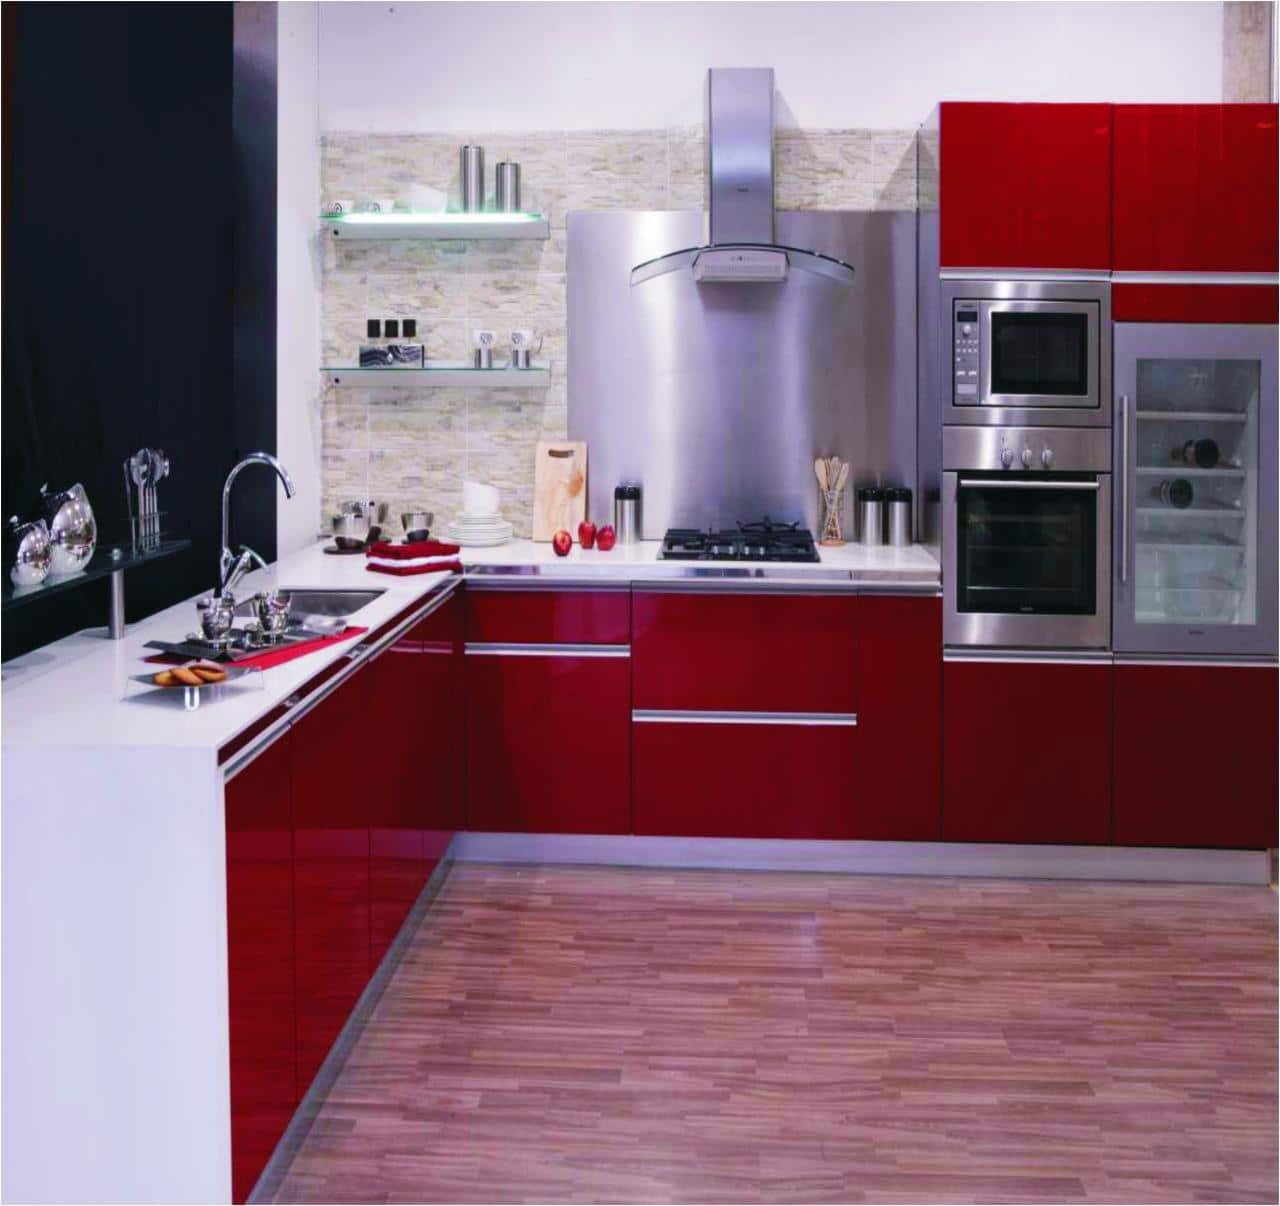 Modular Stainless Steel Kitchen Products & Cabinet